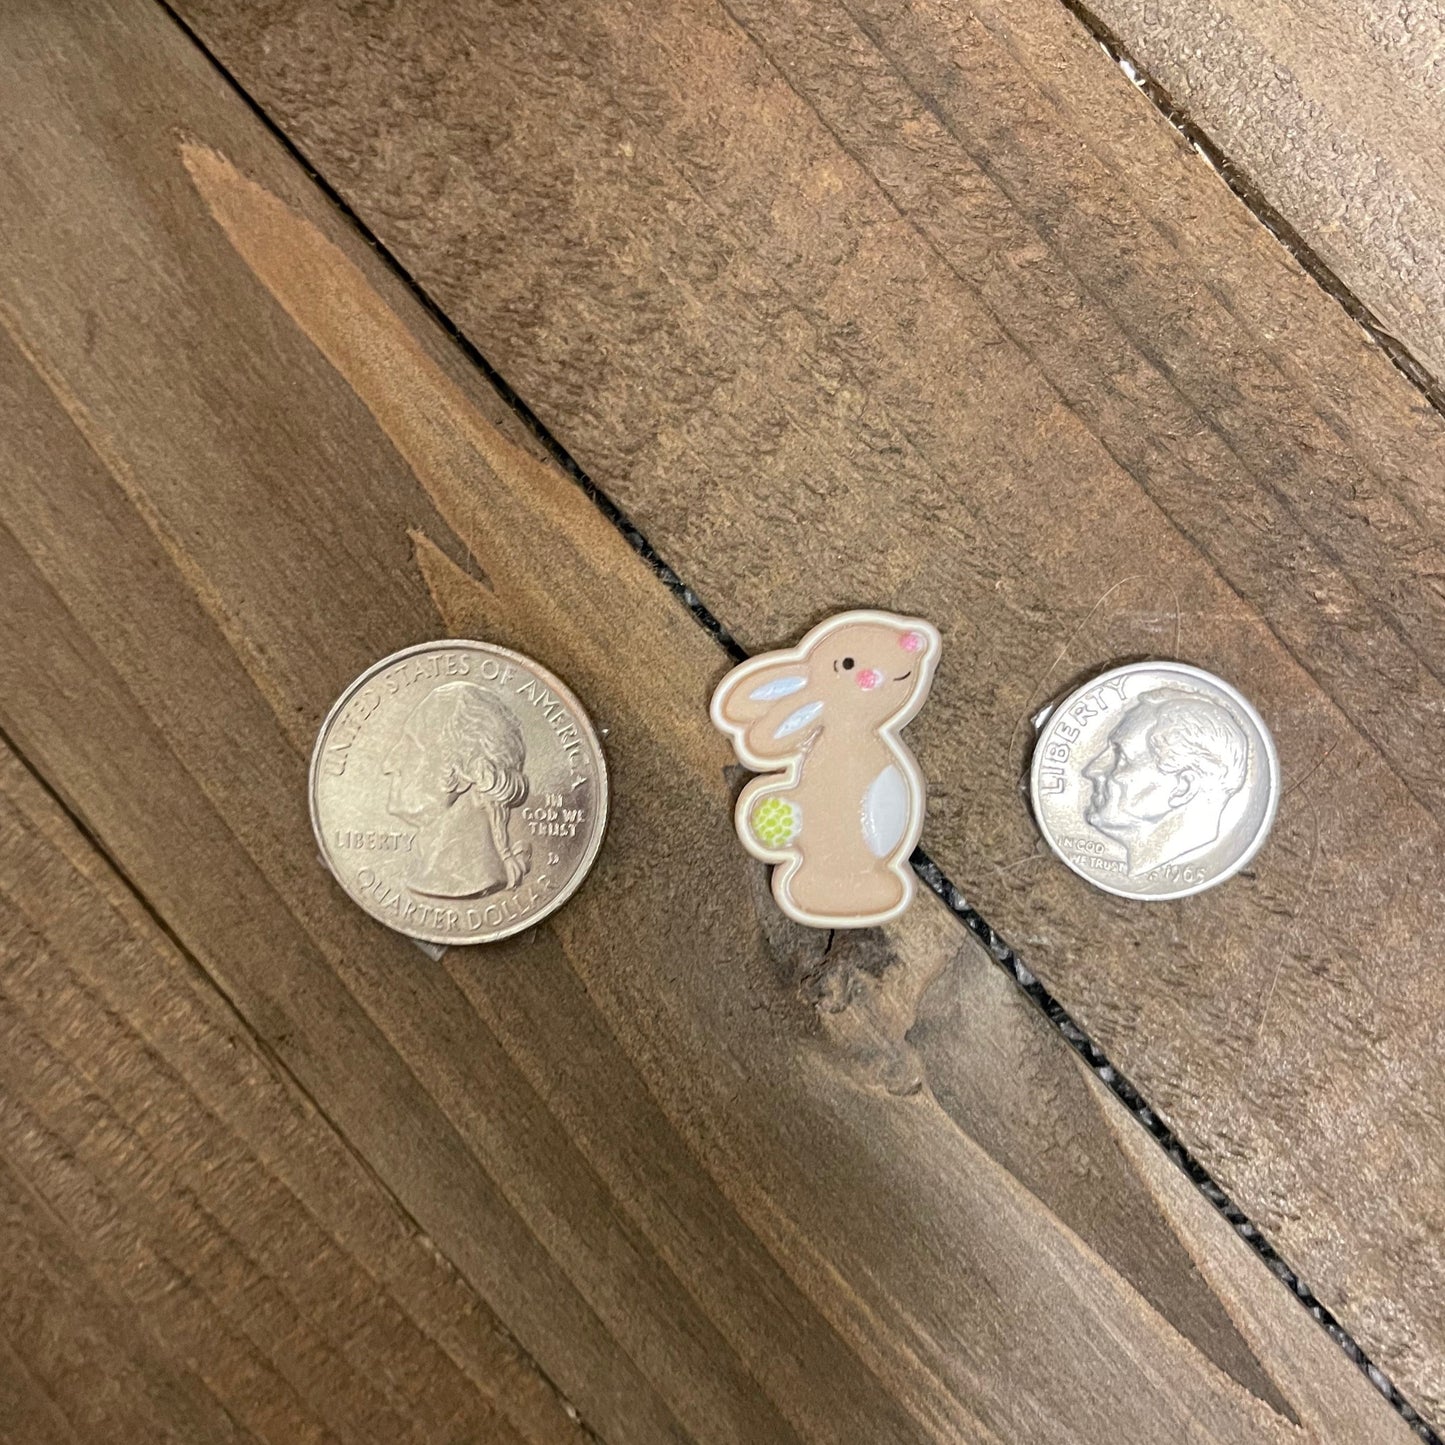 Cottontail Bunny Stud Earrings (5 different ones)